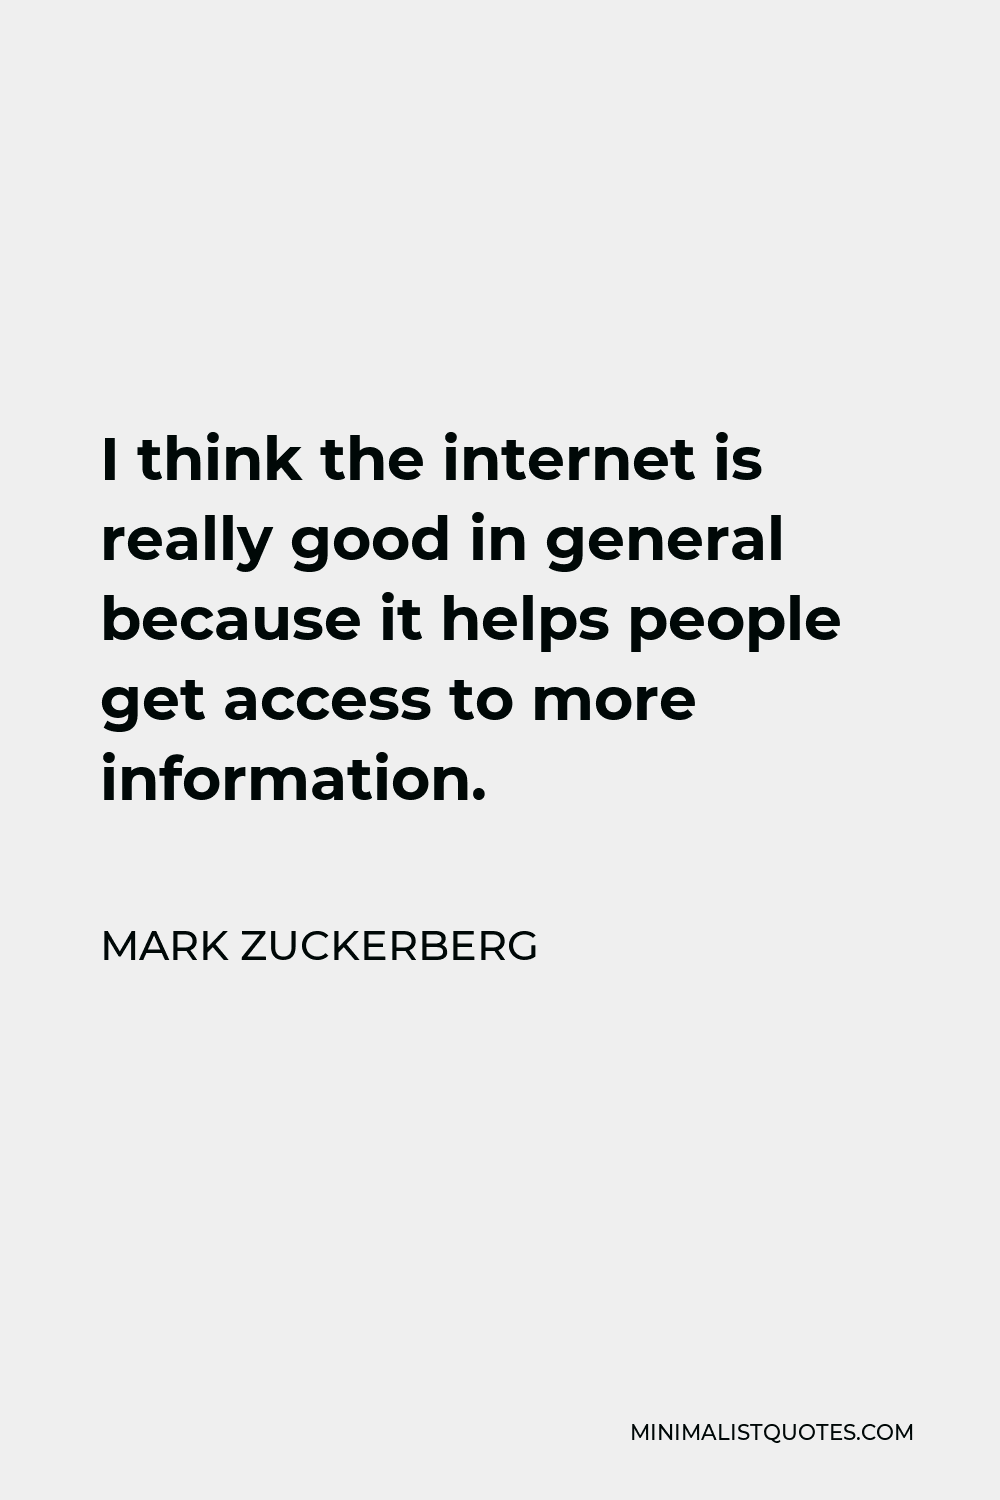 Mark Zuckerberg Quote - I think the internet is really good in general because it helps people get access to more information.